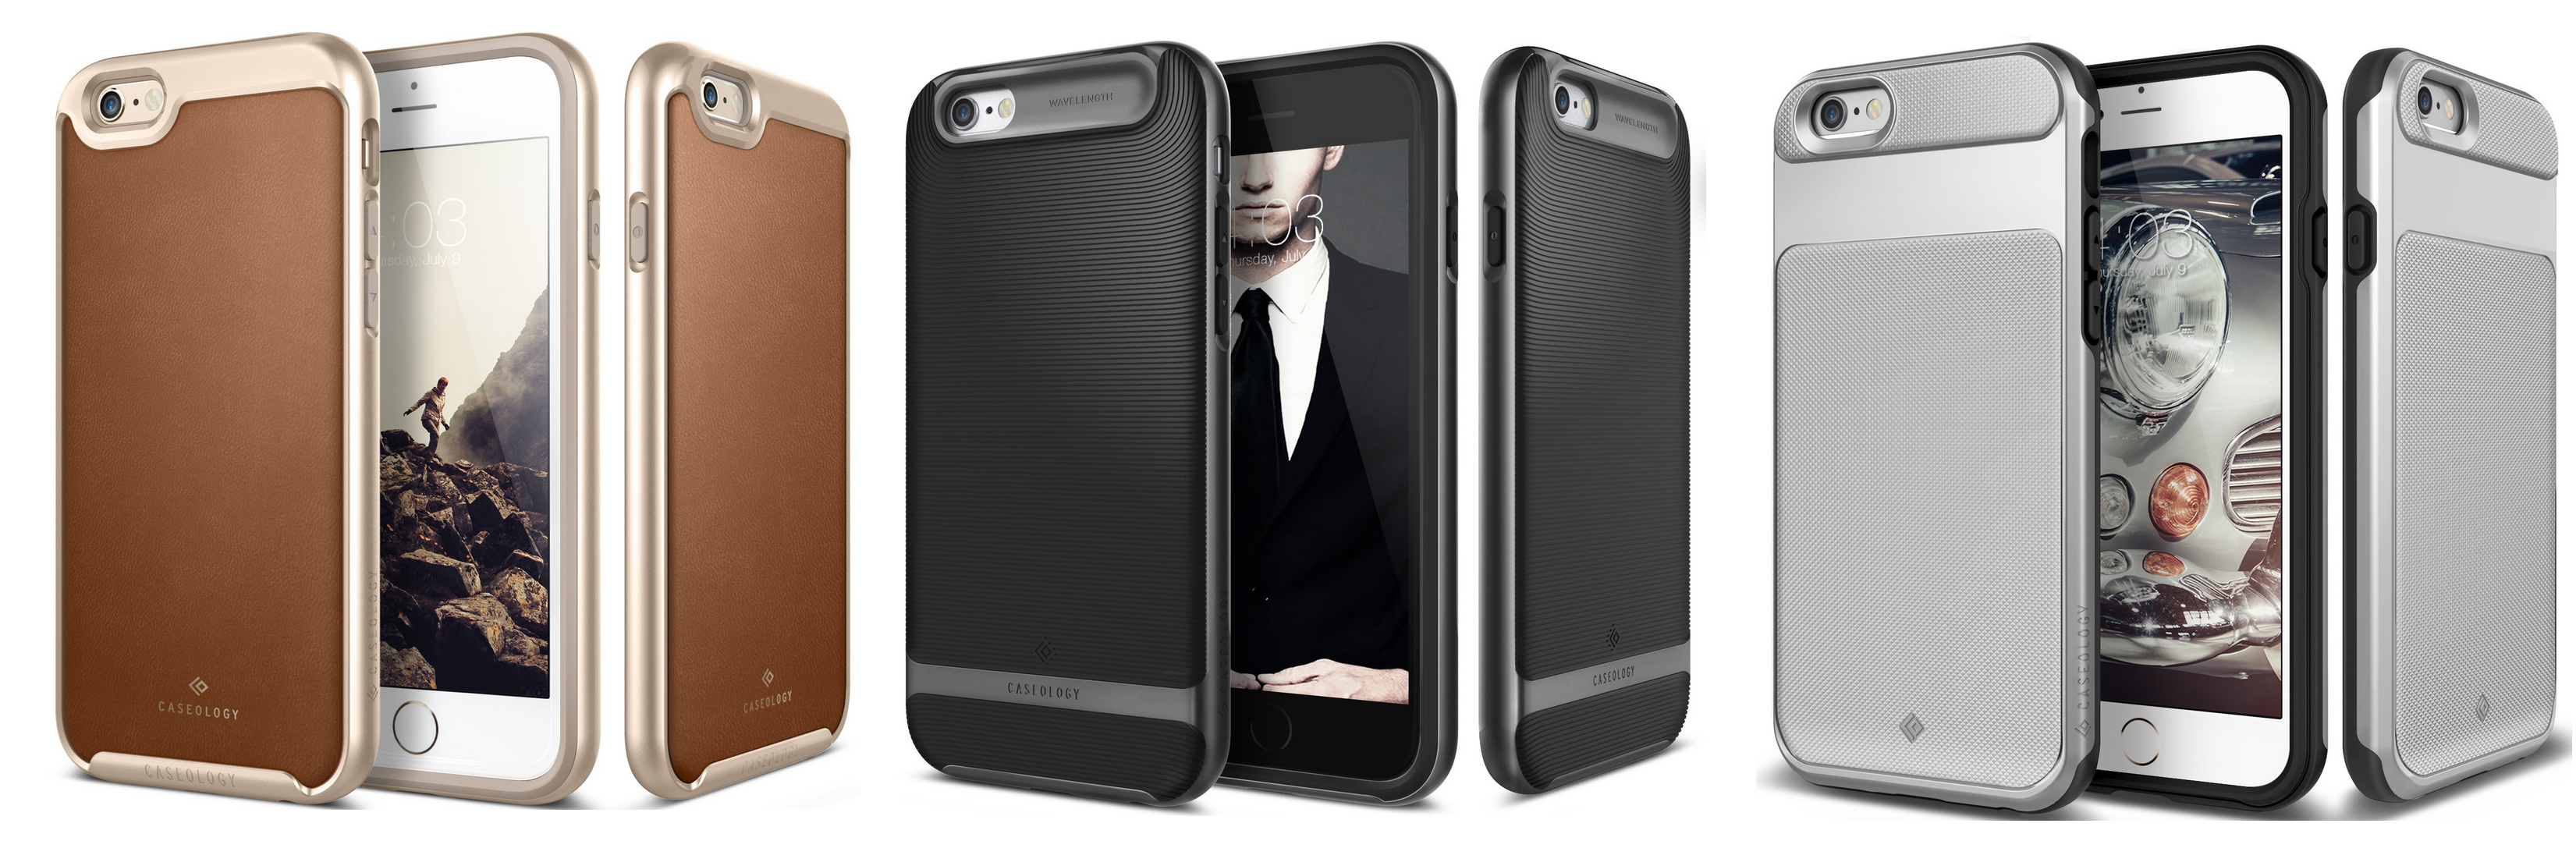 Caseology-iPhone-cases